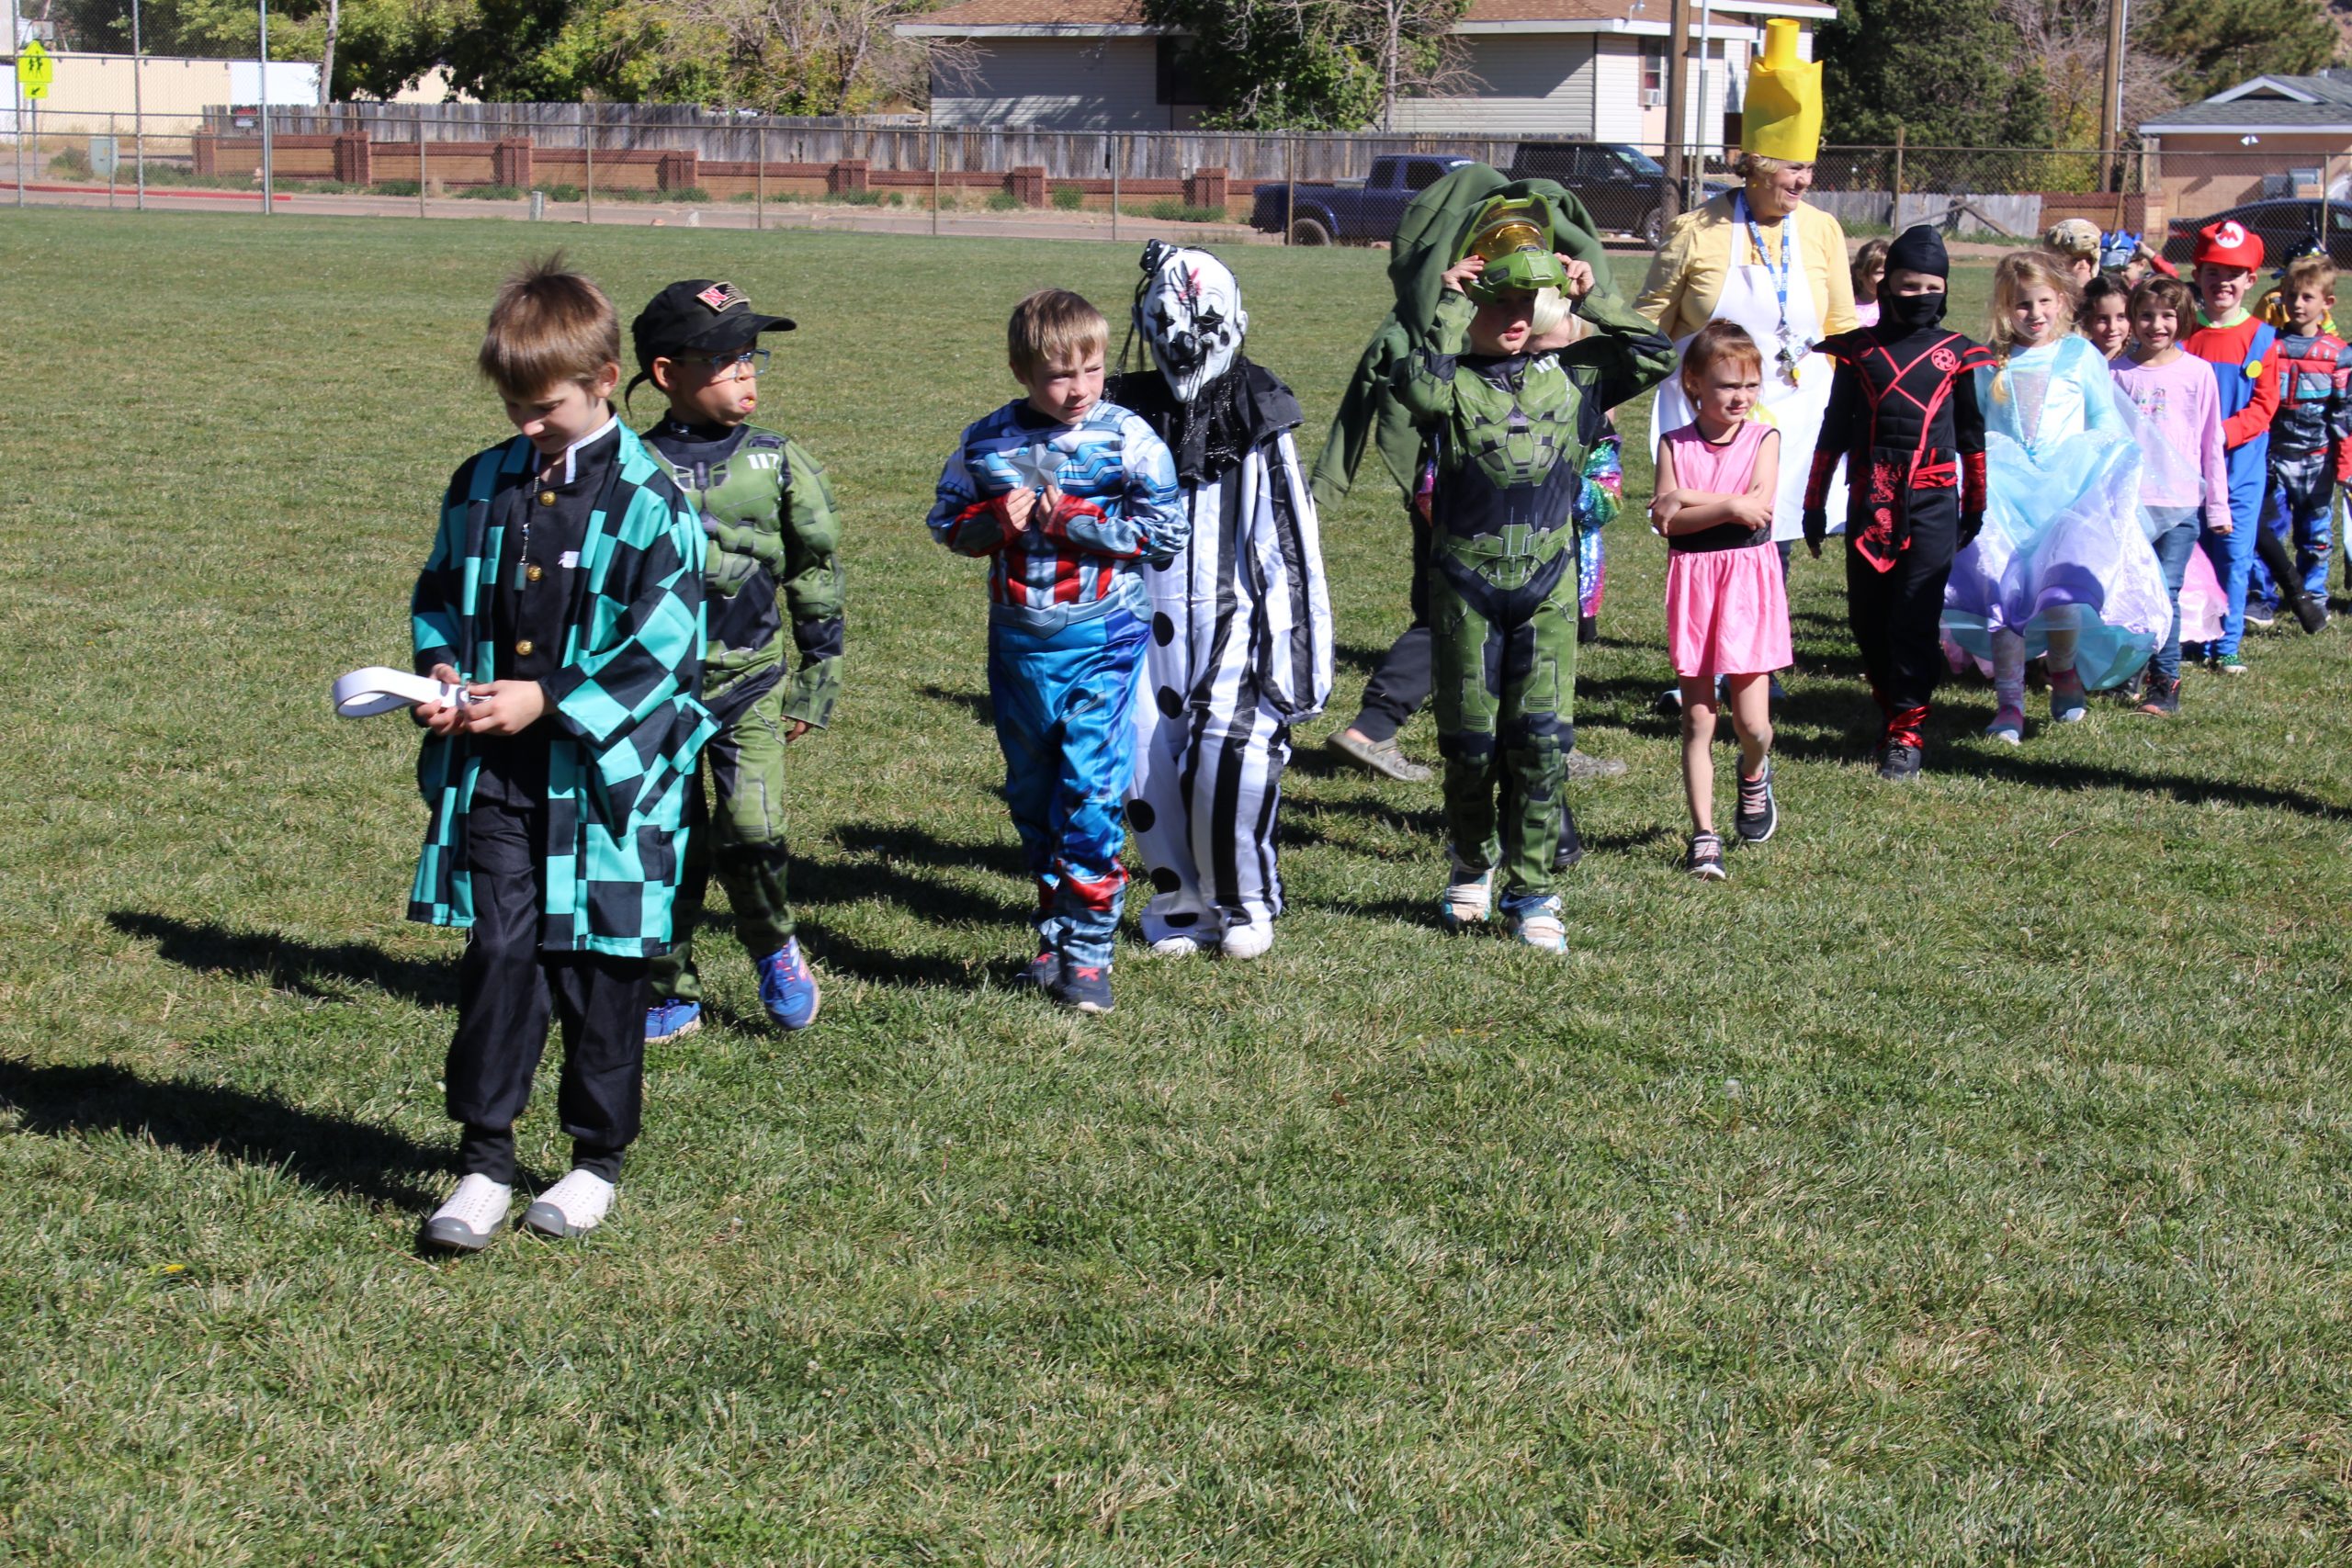 Students in costume for the Halloween parade.